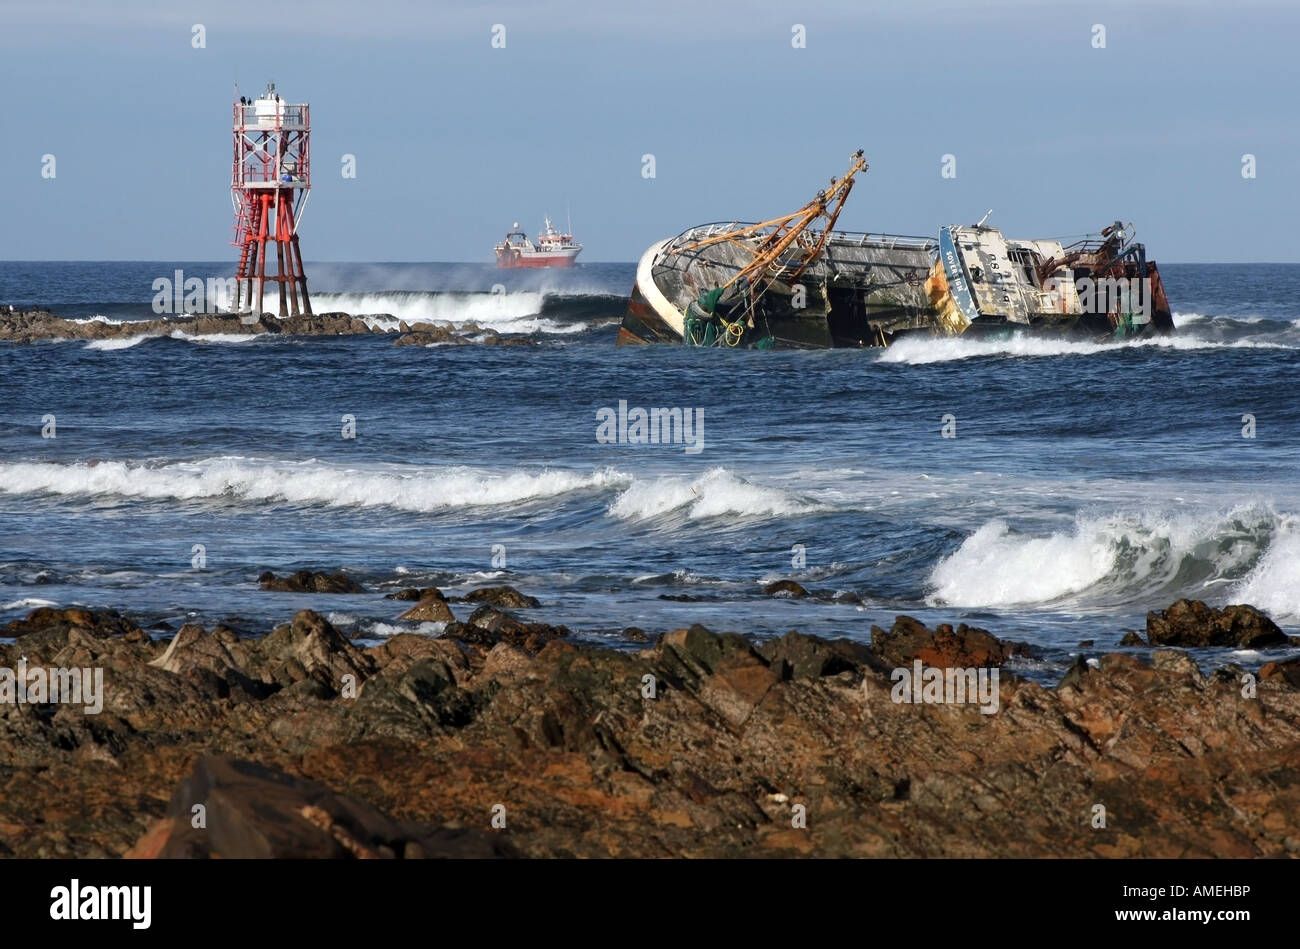 Banff registered Sovereign fishing trawler lies on rocks at Cairnbulg Point near Fraserburgh, Scotland. after running aground Stock Photo